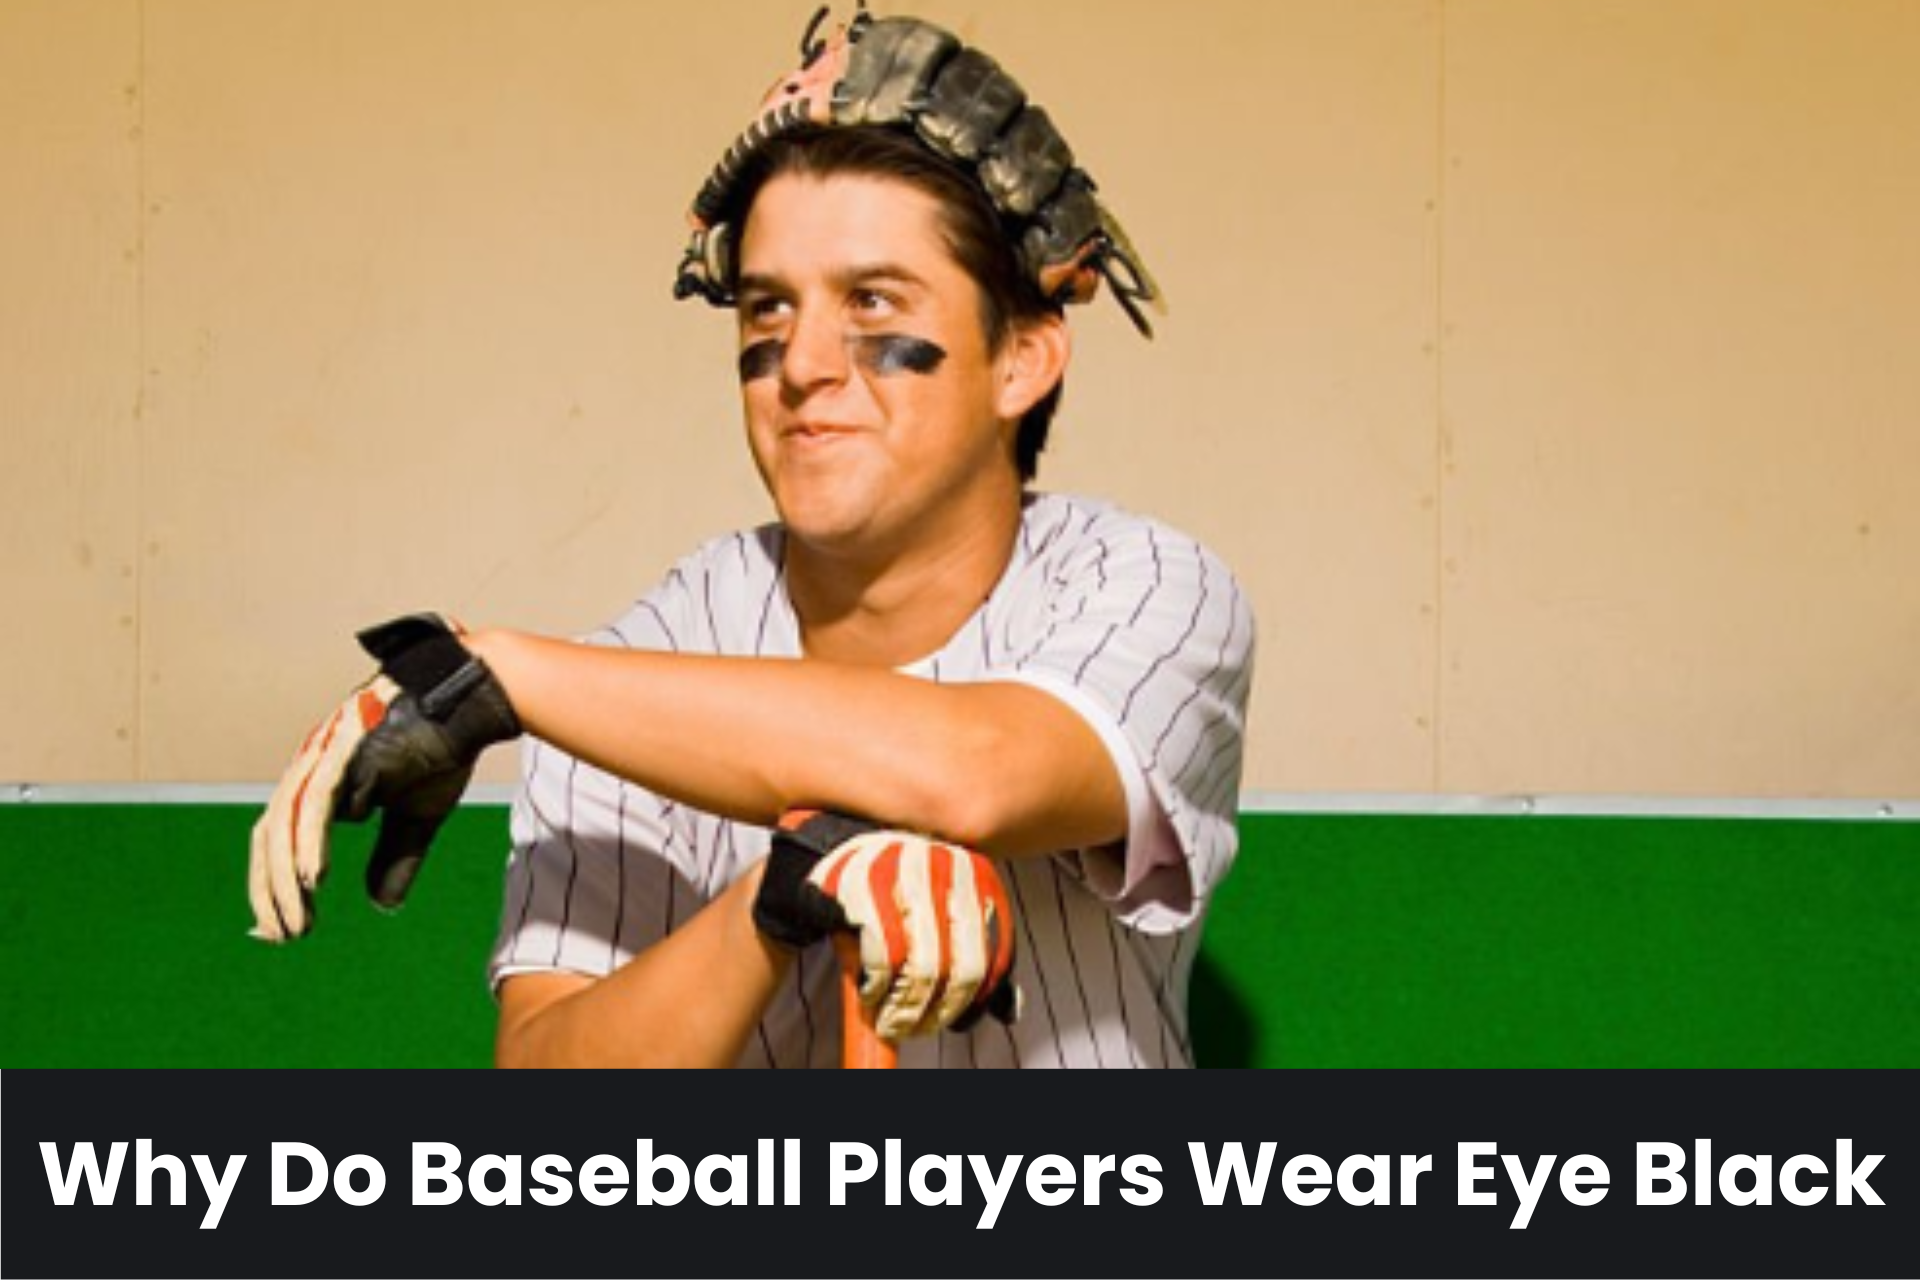 TIL Eye black is a grease applied under the eyes to reduce glare. It is  often used by football, baseball, and lacrosse players, where sunlight or  stadium lights can impair vision of